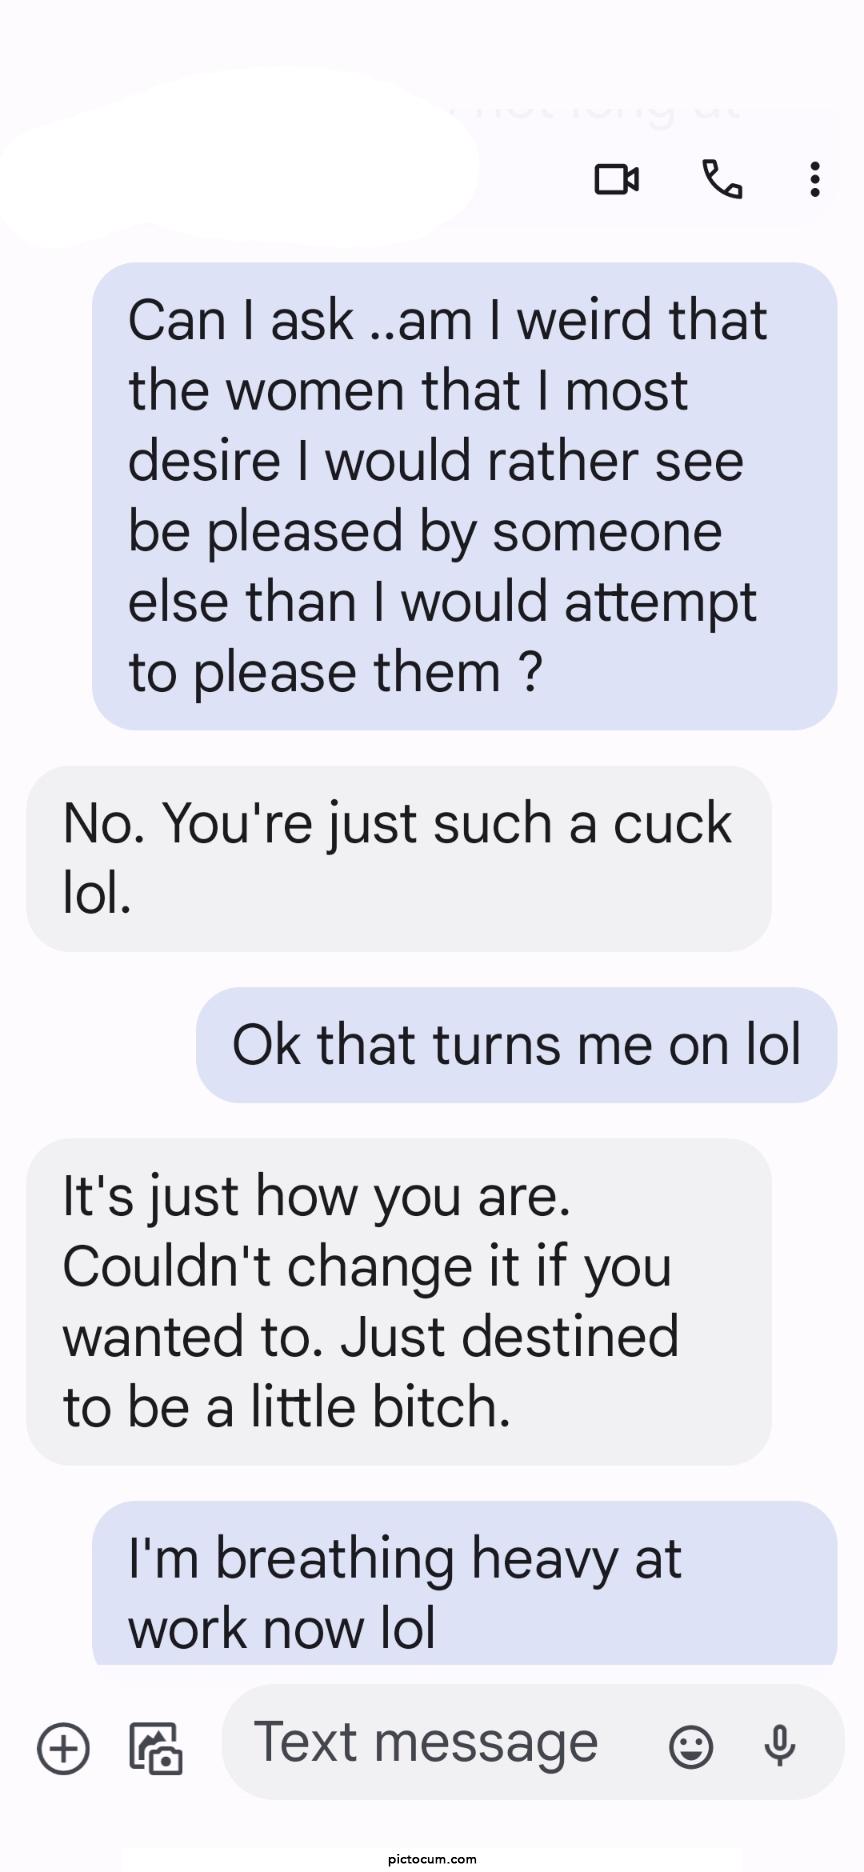 Feeling weird about my cuckolding kink so I hit up my other friend hoping she could make me feel better about it . She ended up turning me on instead.